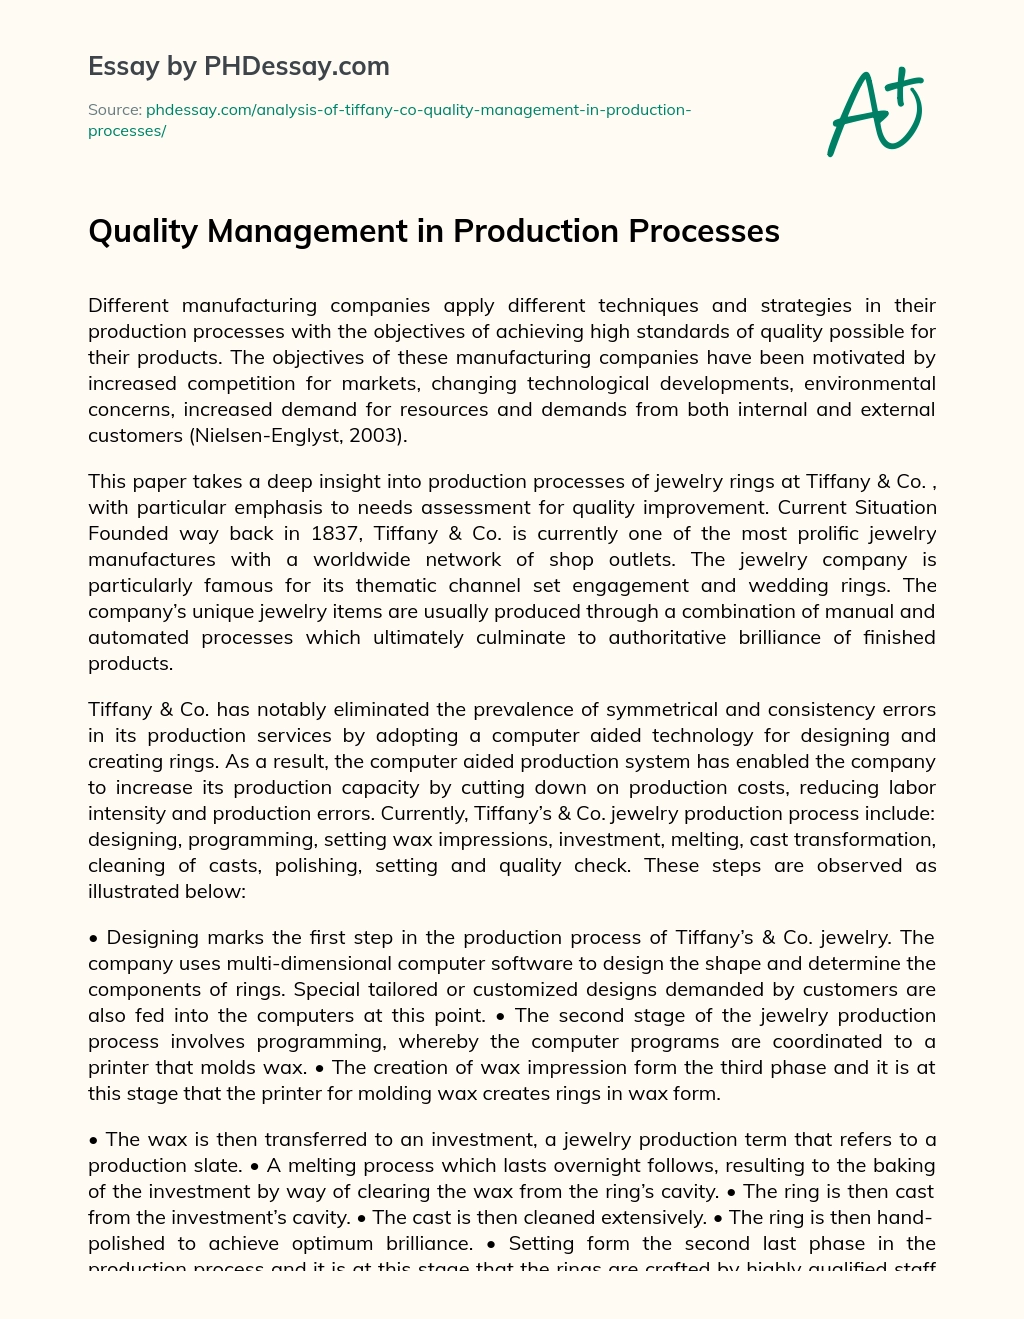 Quality Management in Production Processes essay